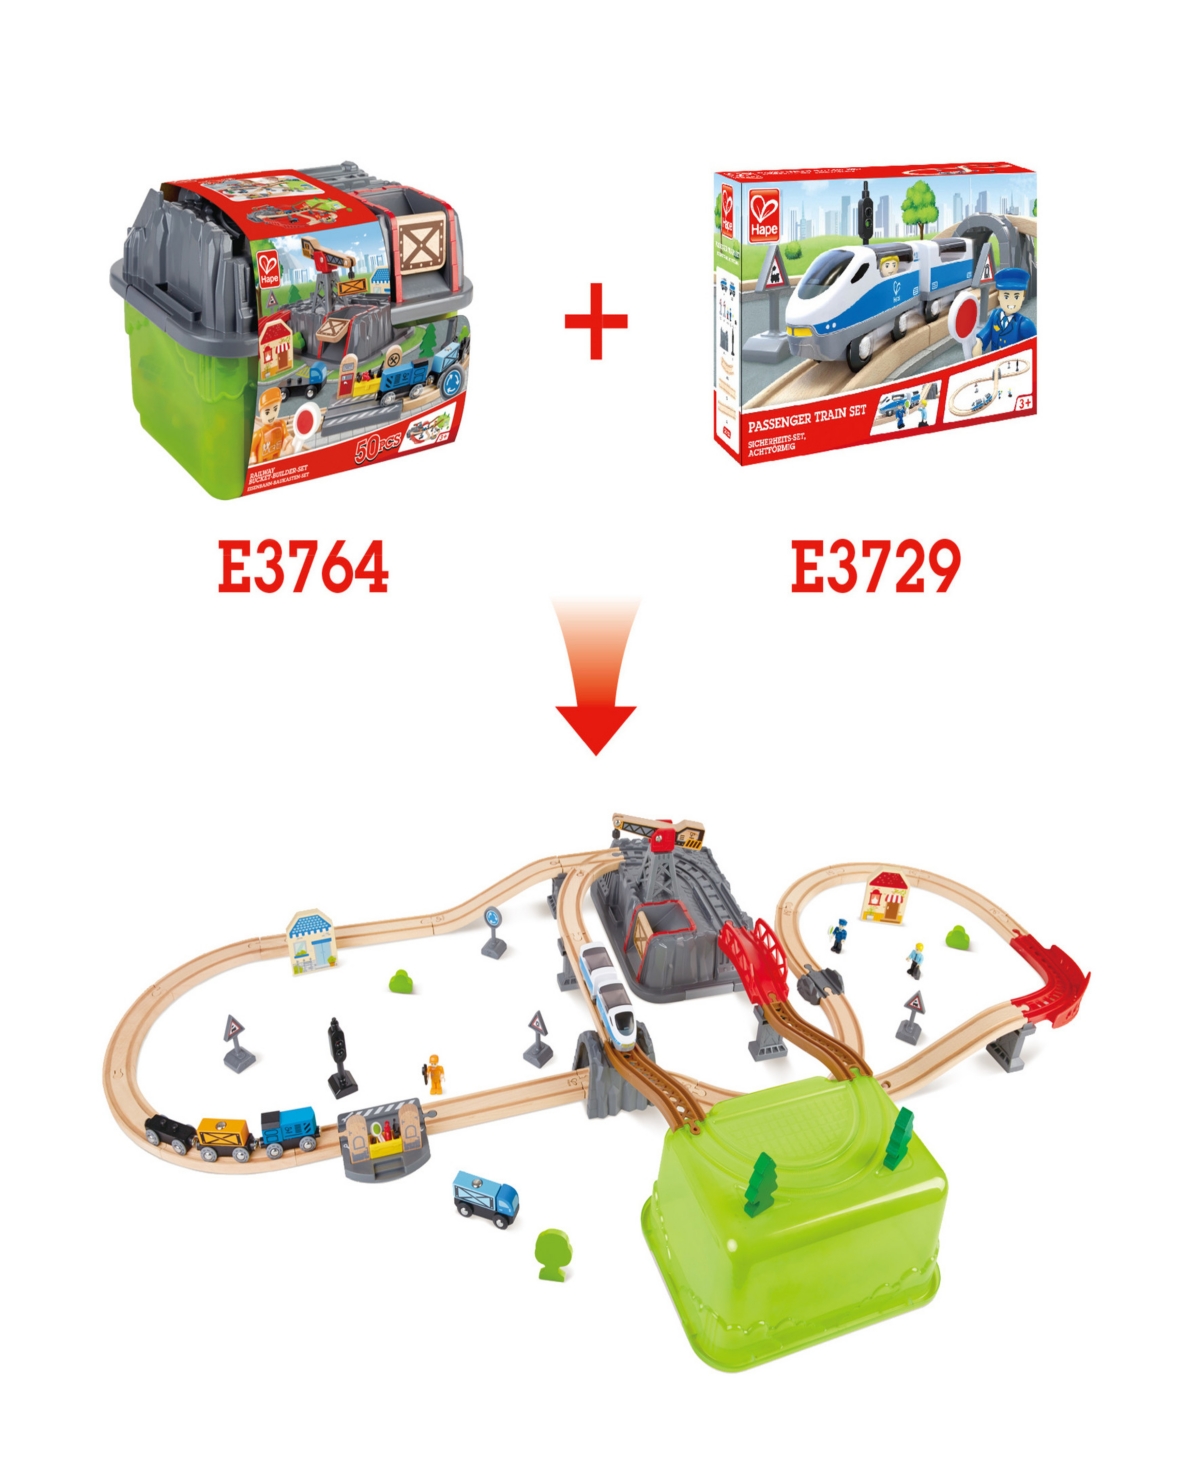 Shop Hape Railway Bucket Builder Set With Train And Tracks In Multicolored